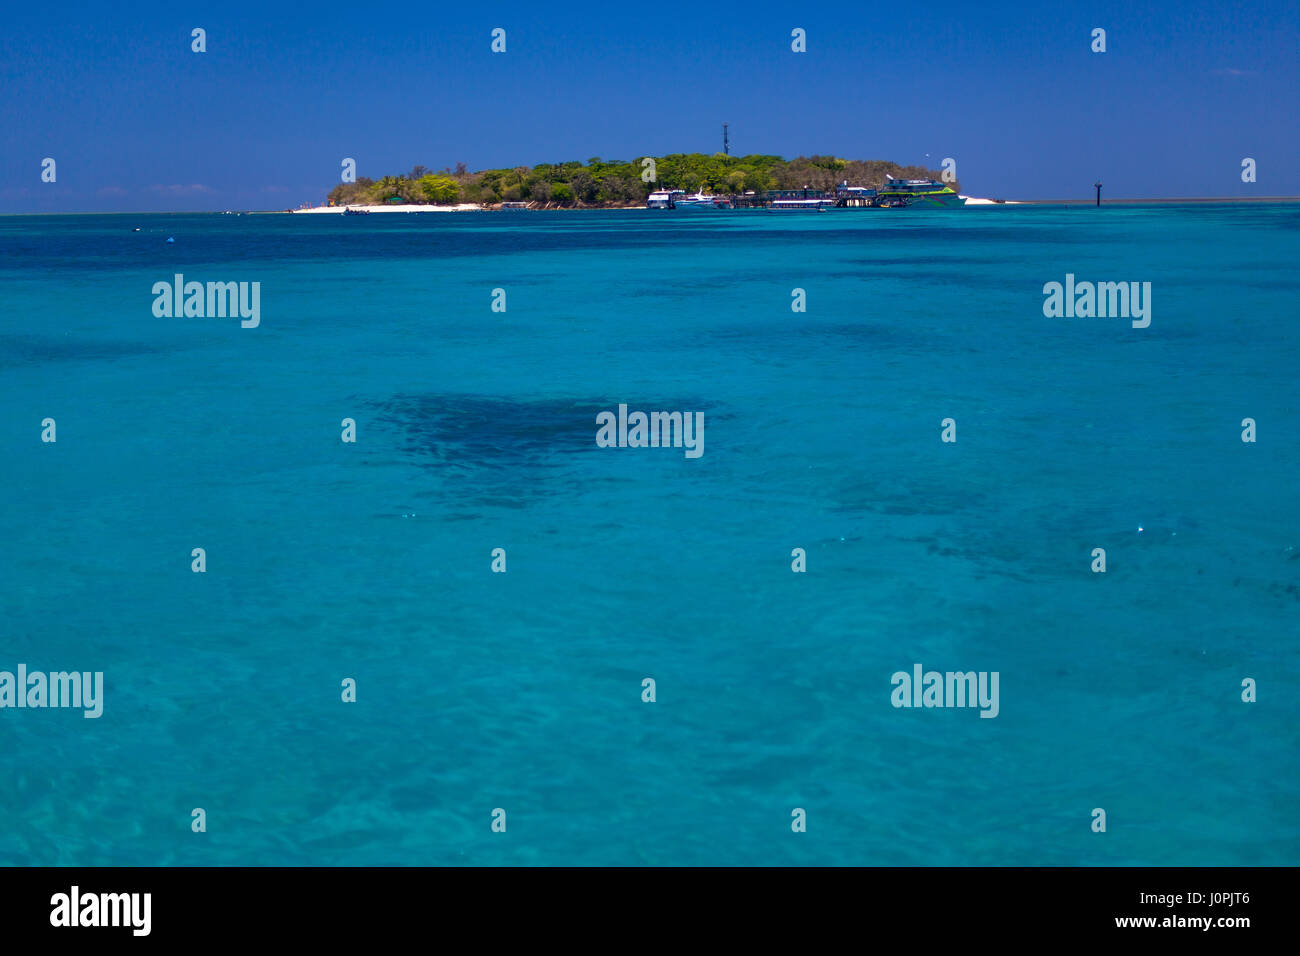 Green island resort seen from the turquoise Coral Sea and Great Barrier Reef. Stock Photo